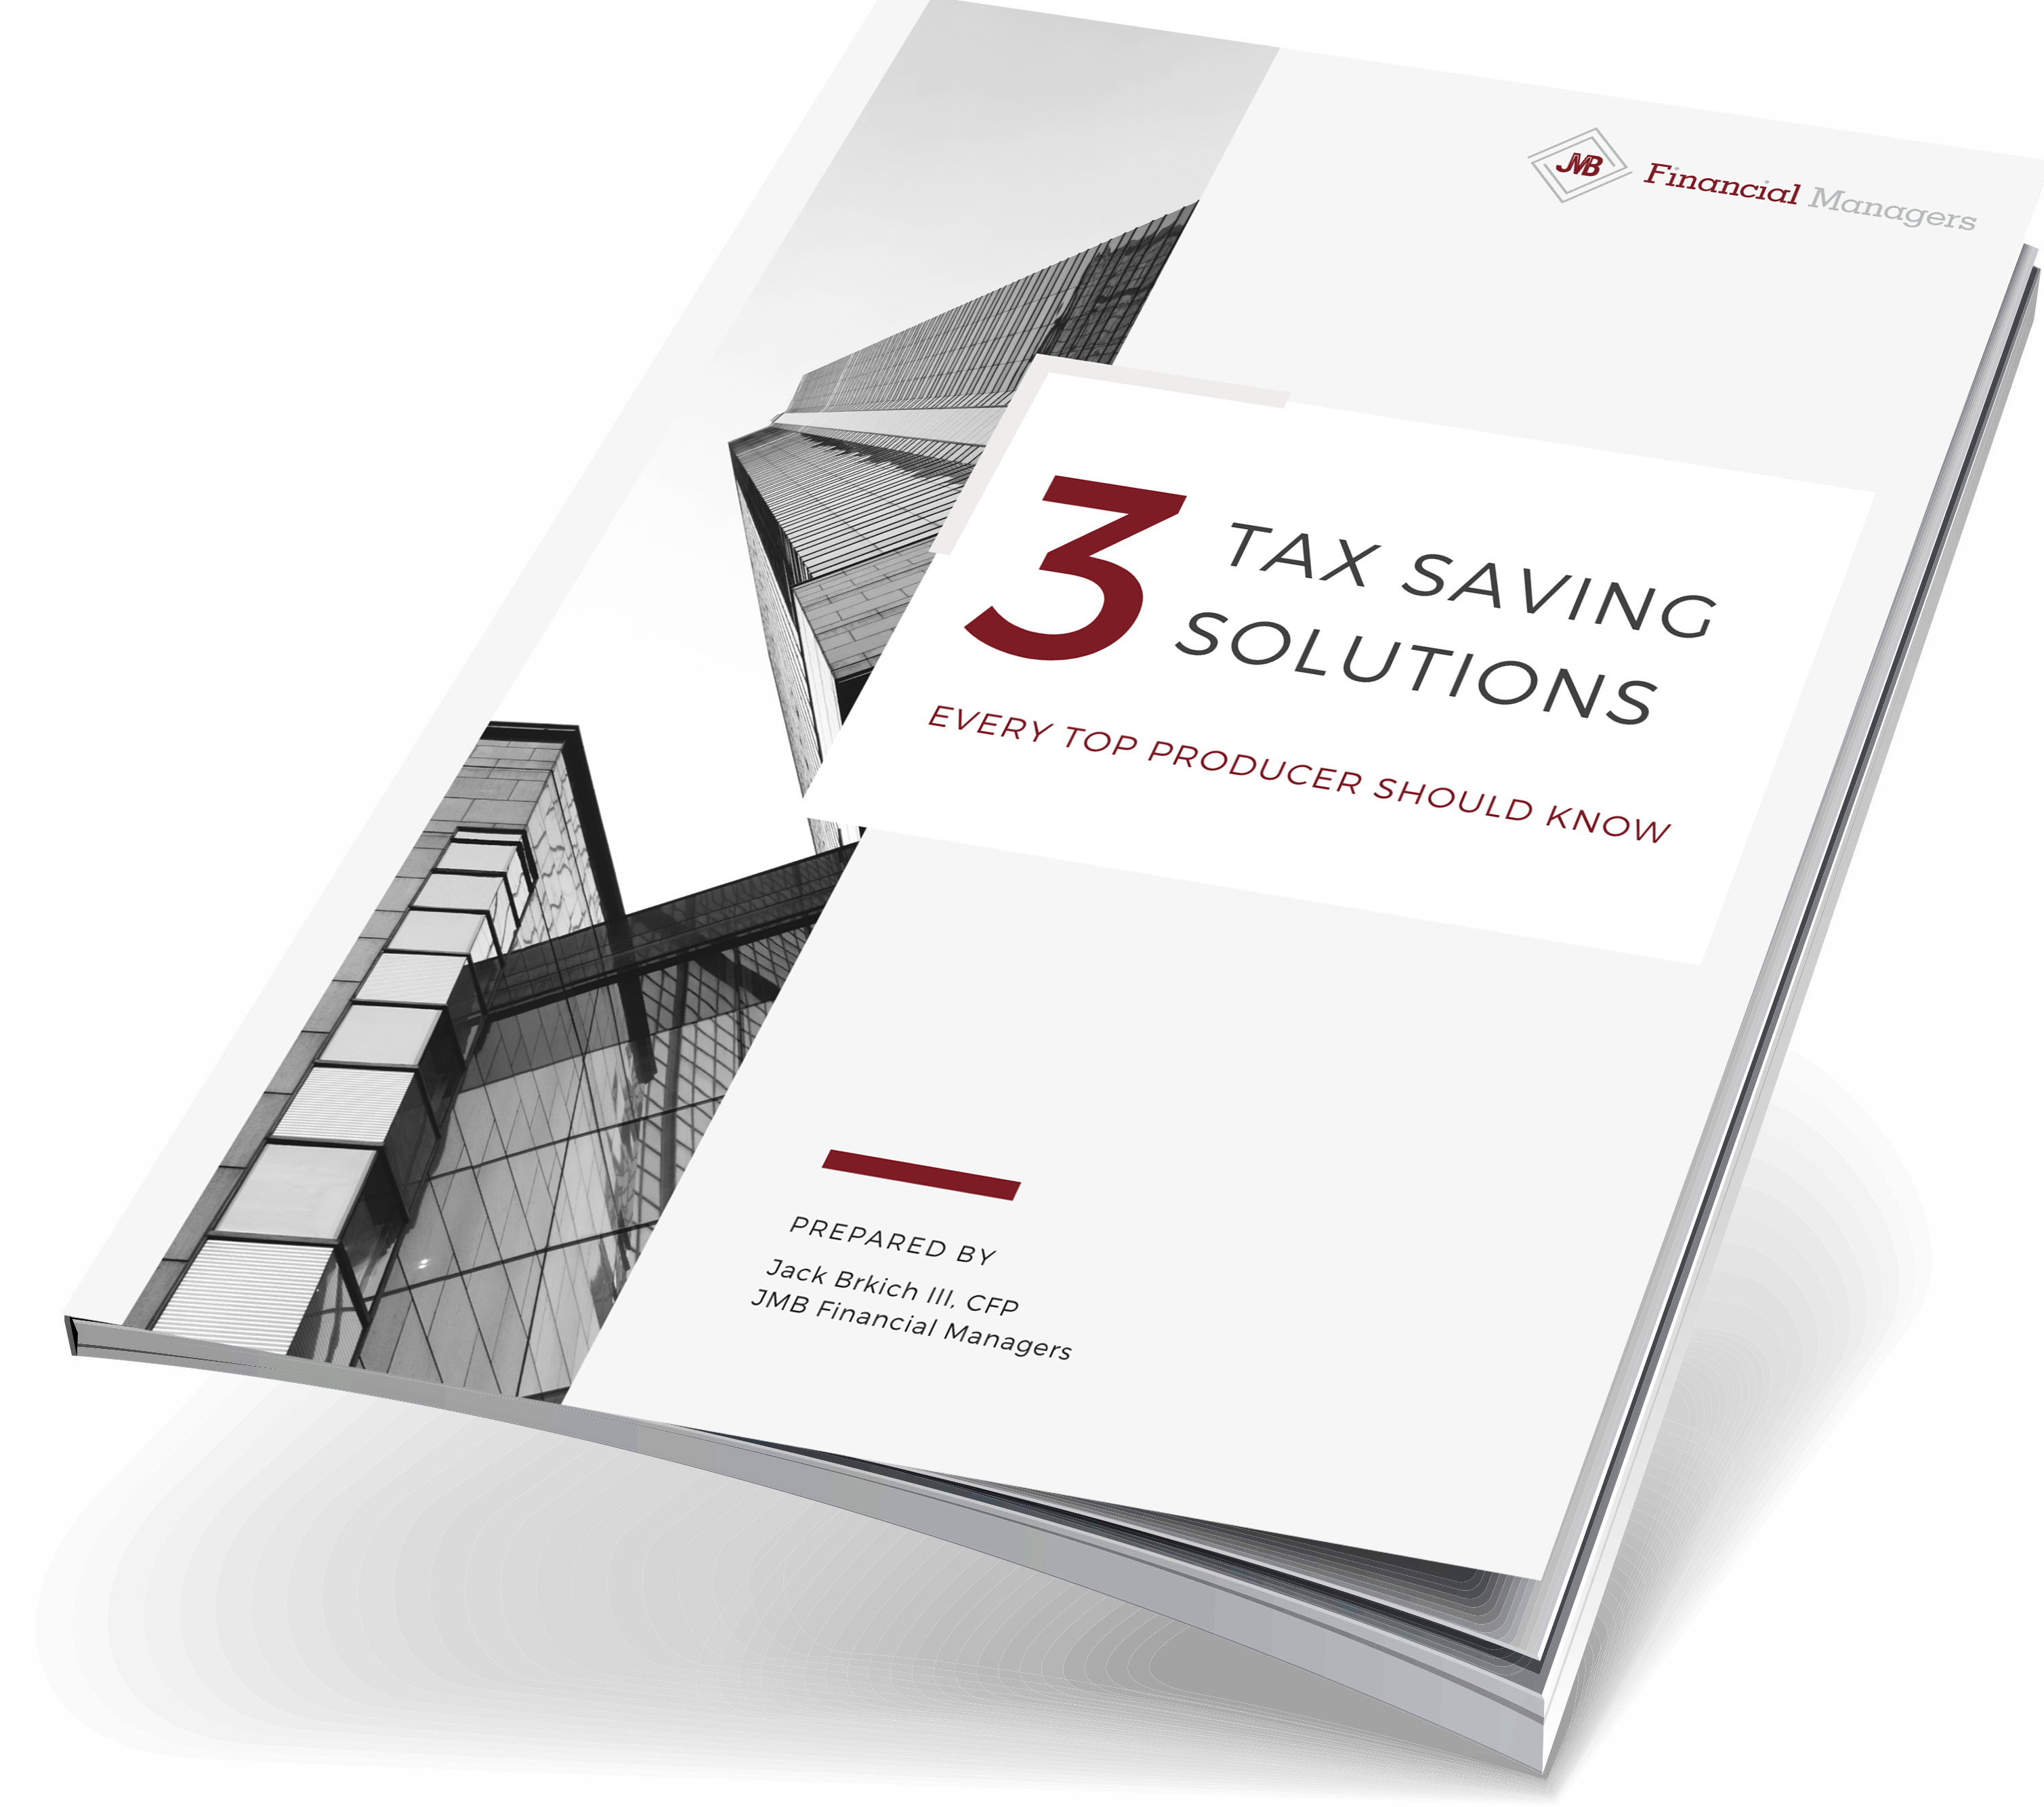 jmb financial managers 3 tax saving solutions guide for top producers